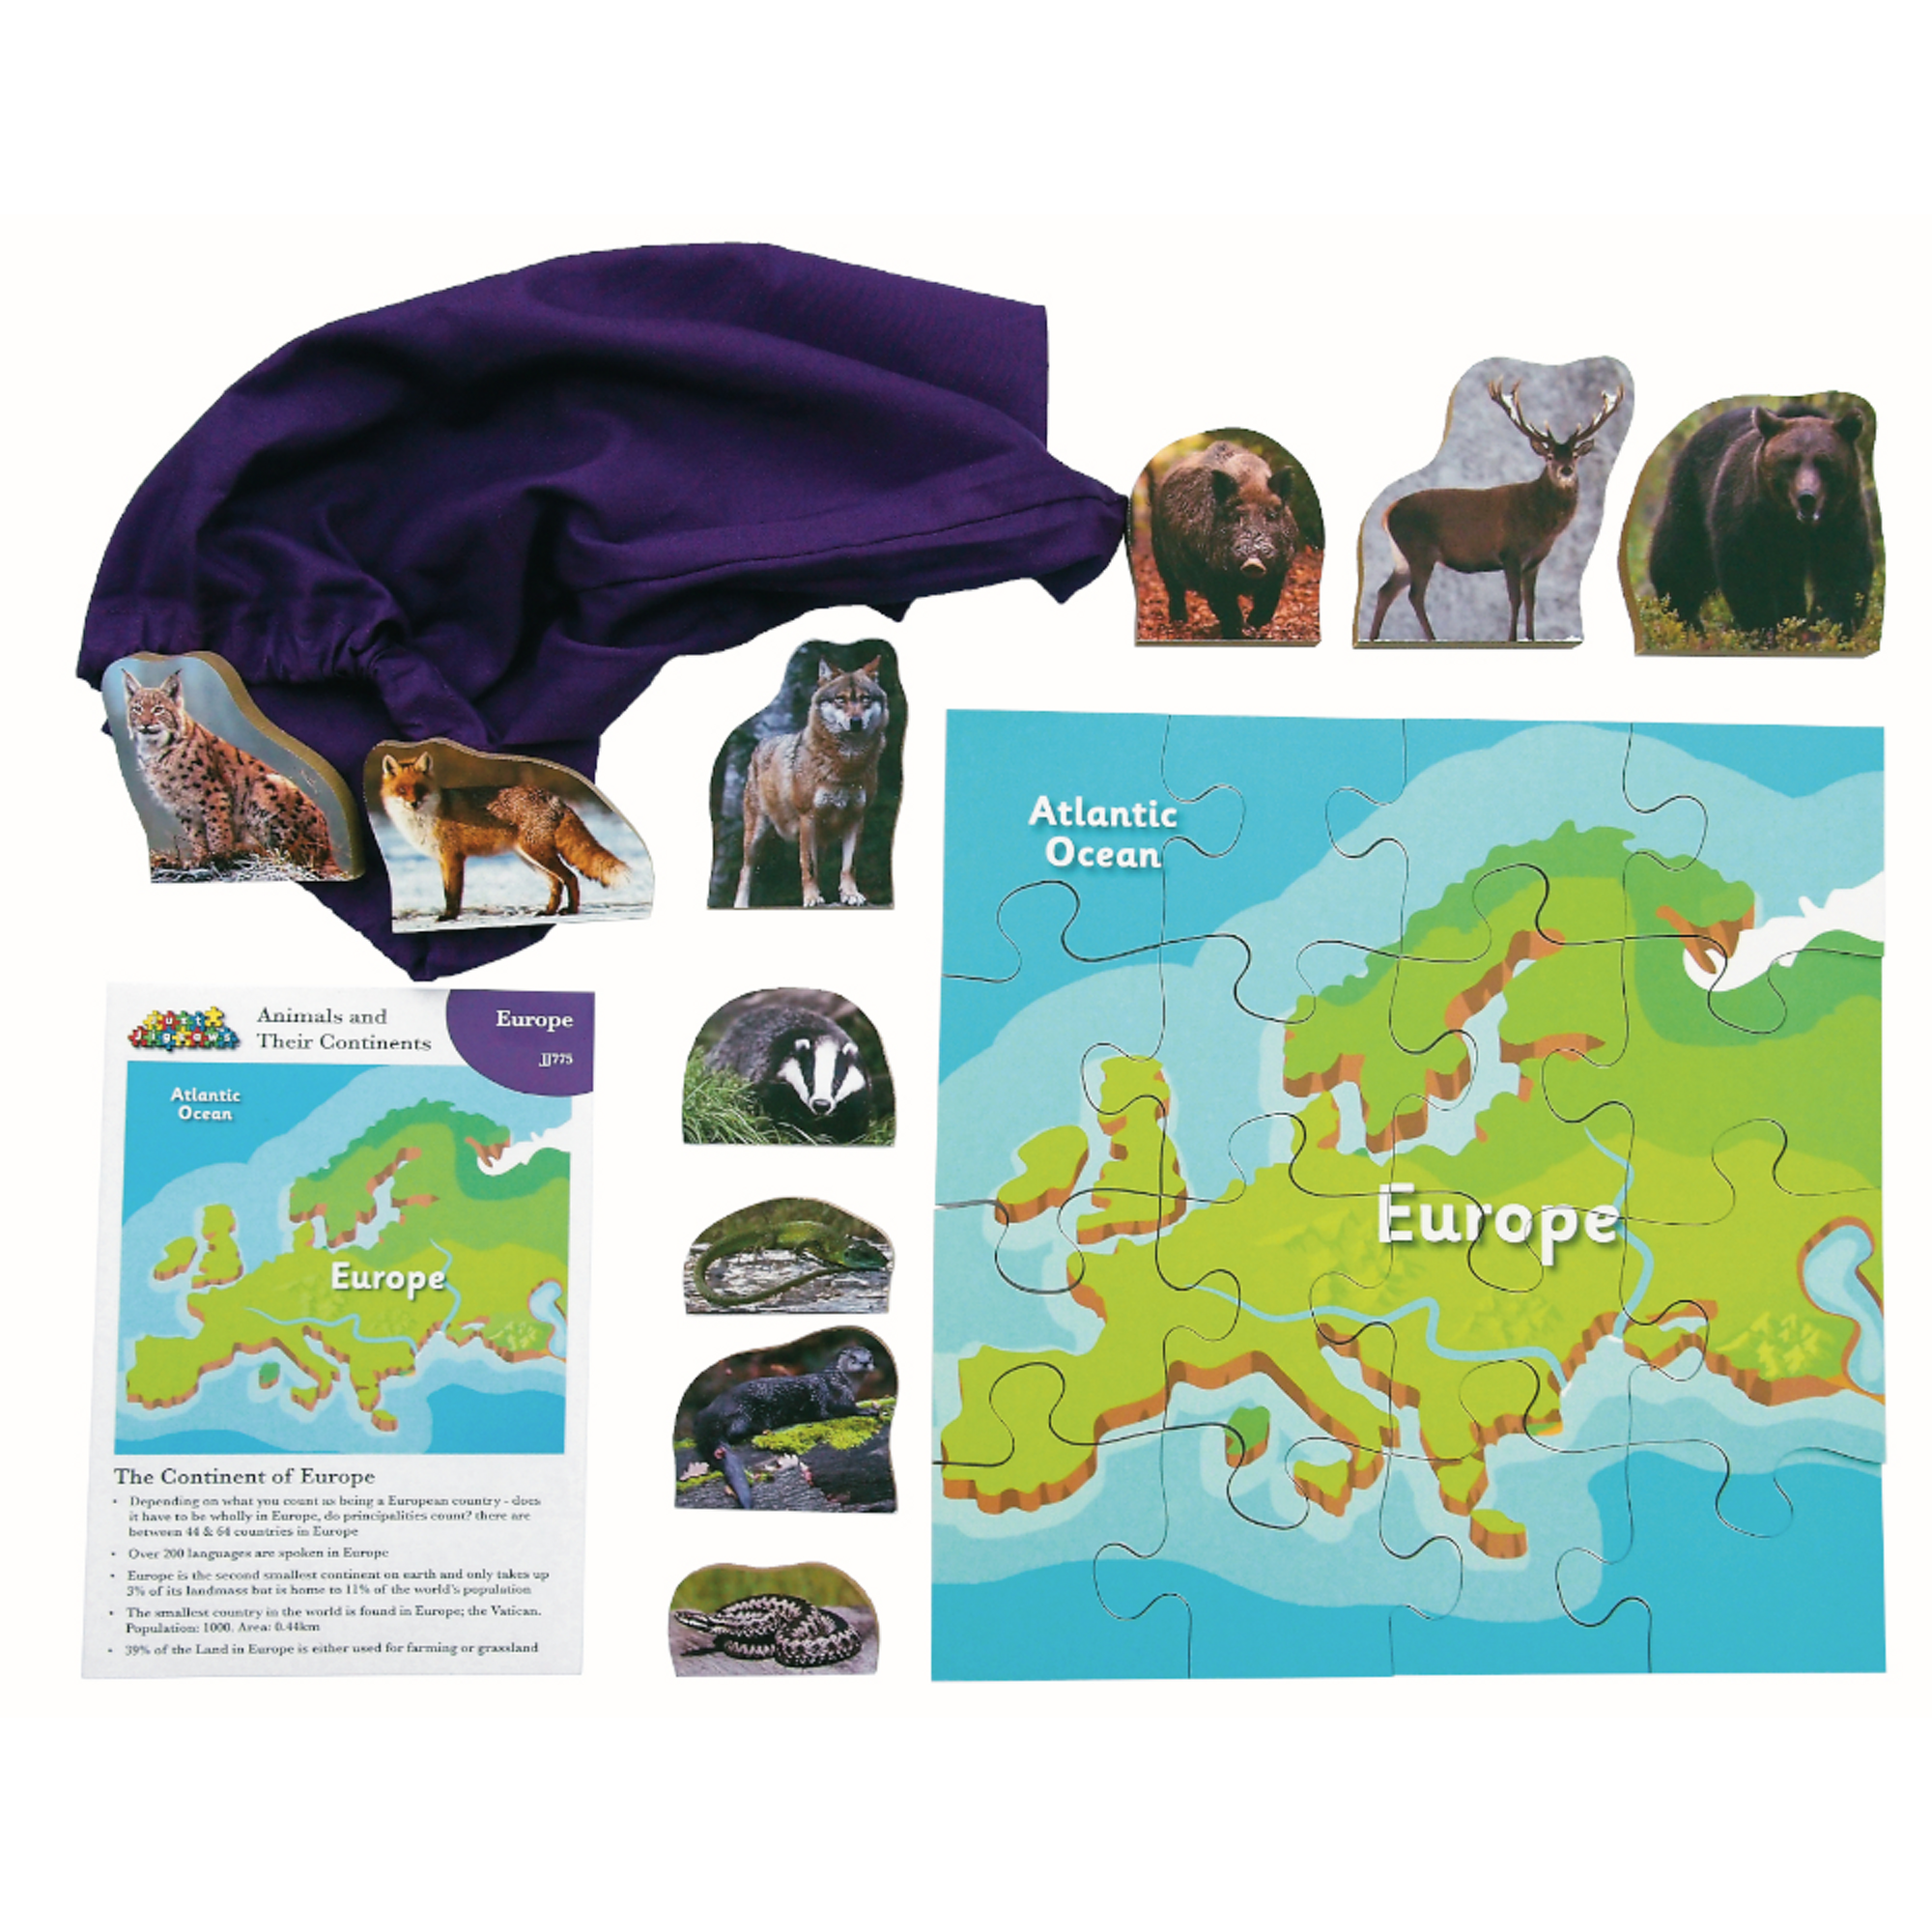 Animals And Their Continents - Europe